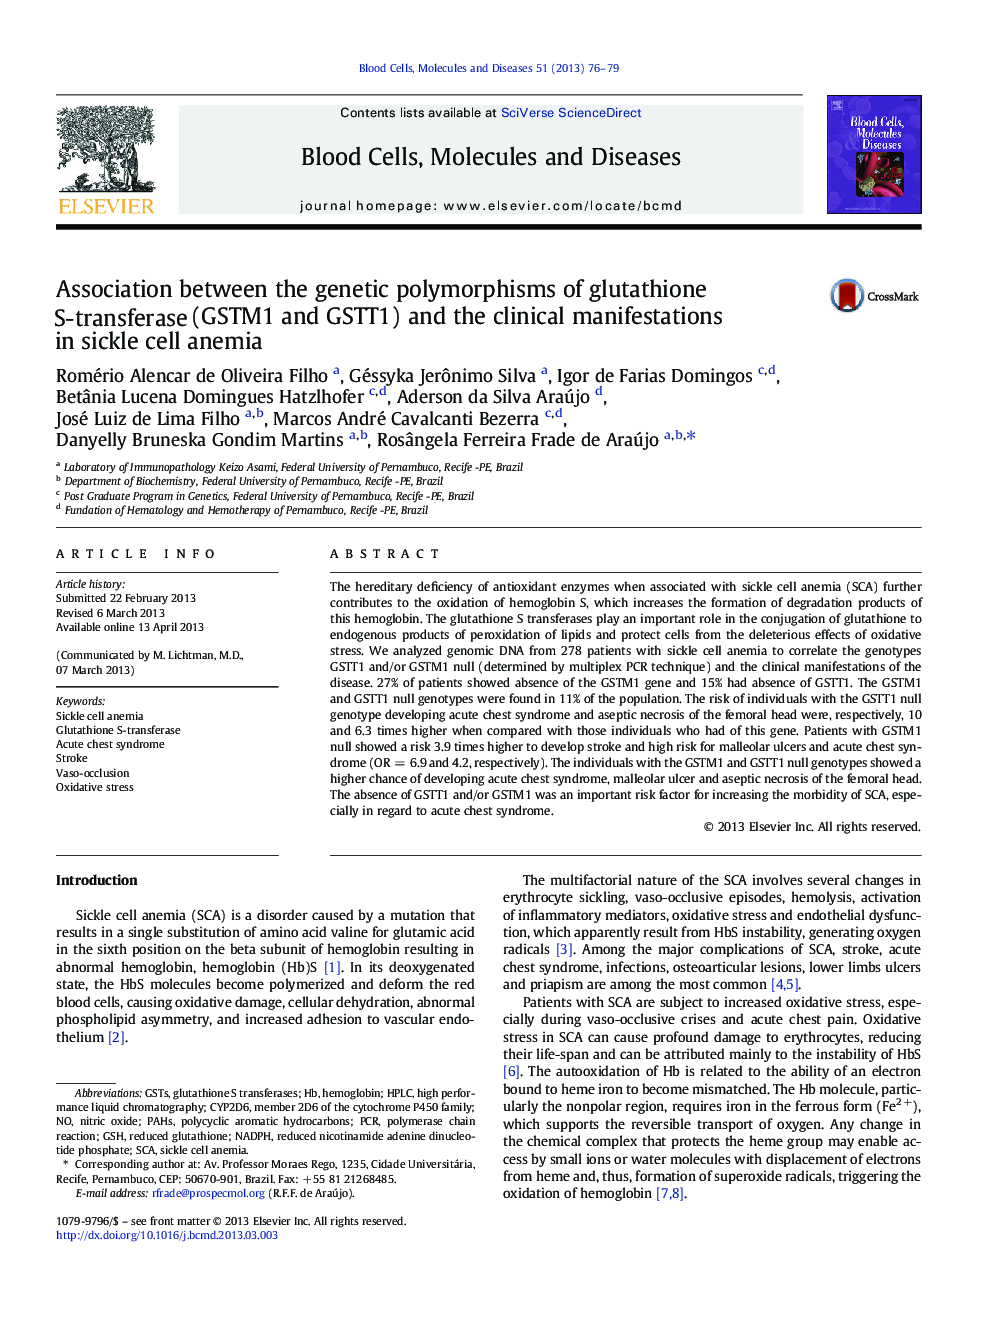 Association between the genetic polymorphisms of glutathione S-transferase (GSTM1 and GSTT1) and the clinical manifestations in sickle cell anemia